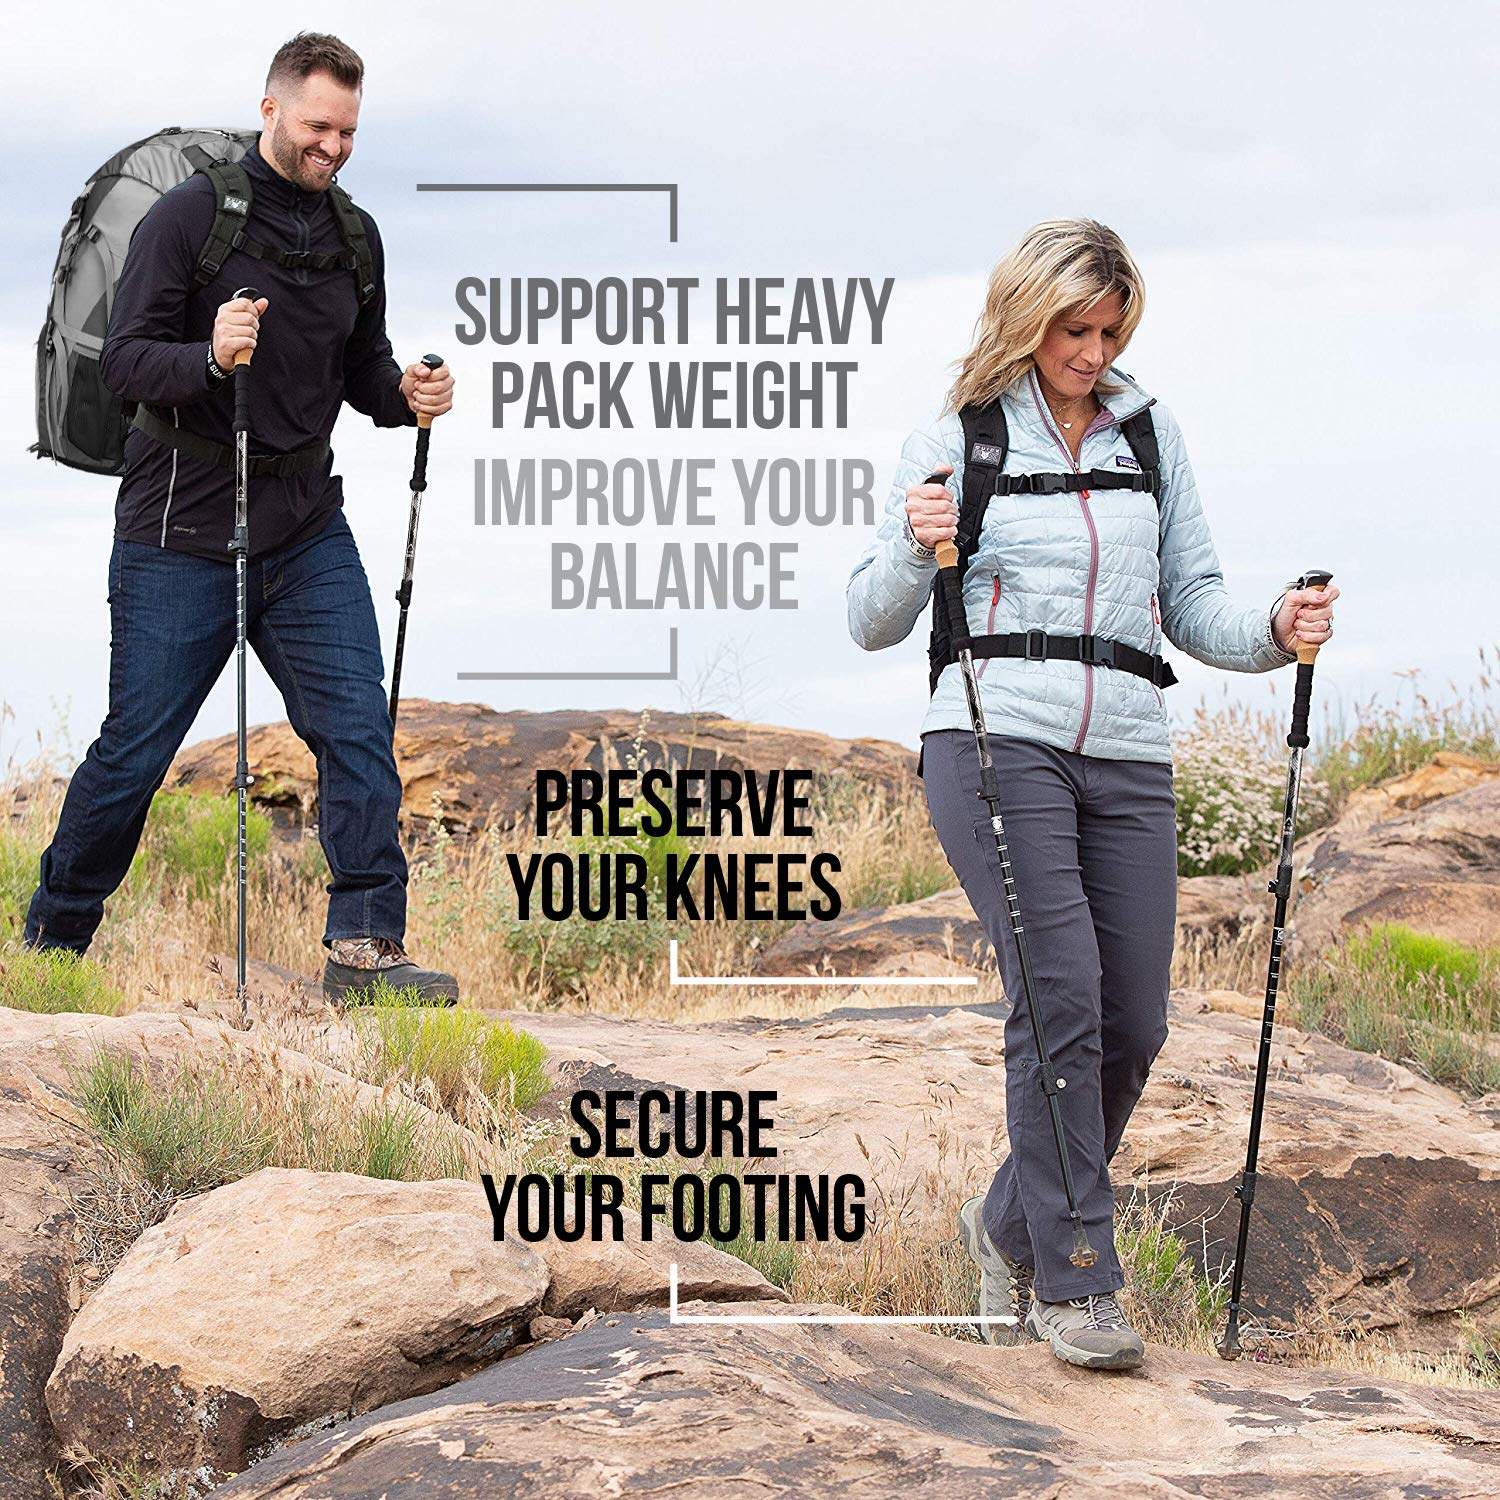 Alpine Summit Hiking/Trekking Poles with Quick Locks, Walking Sticks with Strong and Lightweight 7075 Aluminum and Cork Grips - Enjoy The Great Outdoors - image 5 of 7